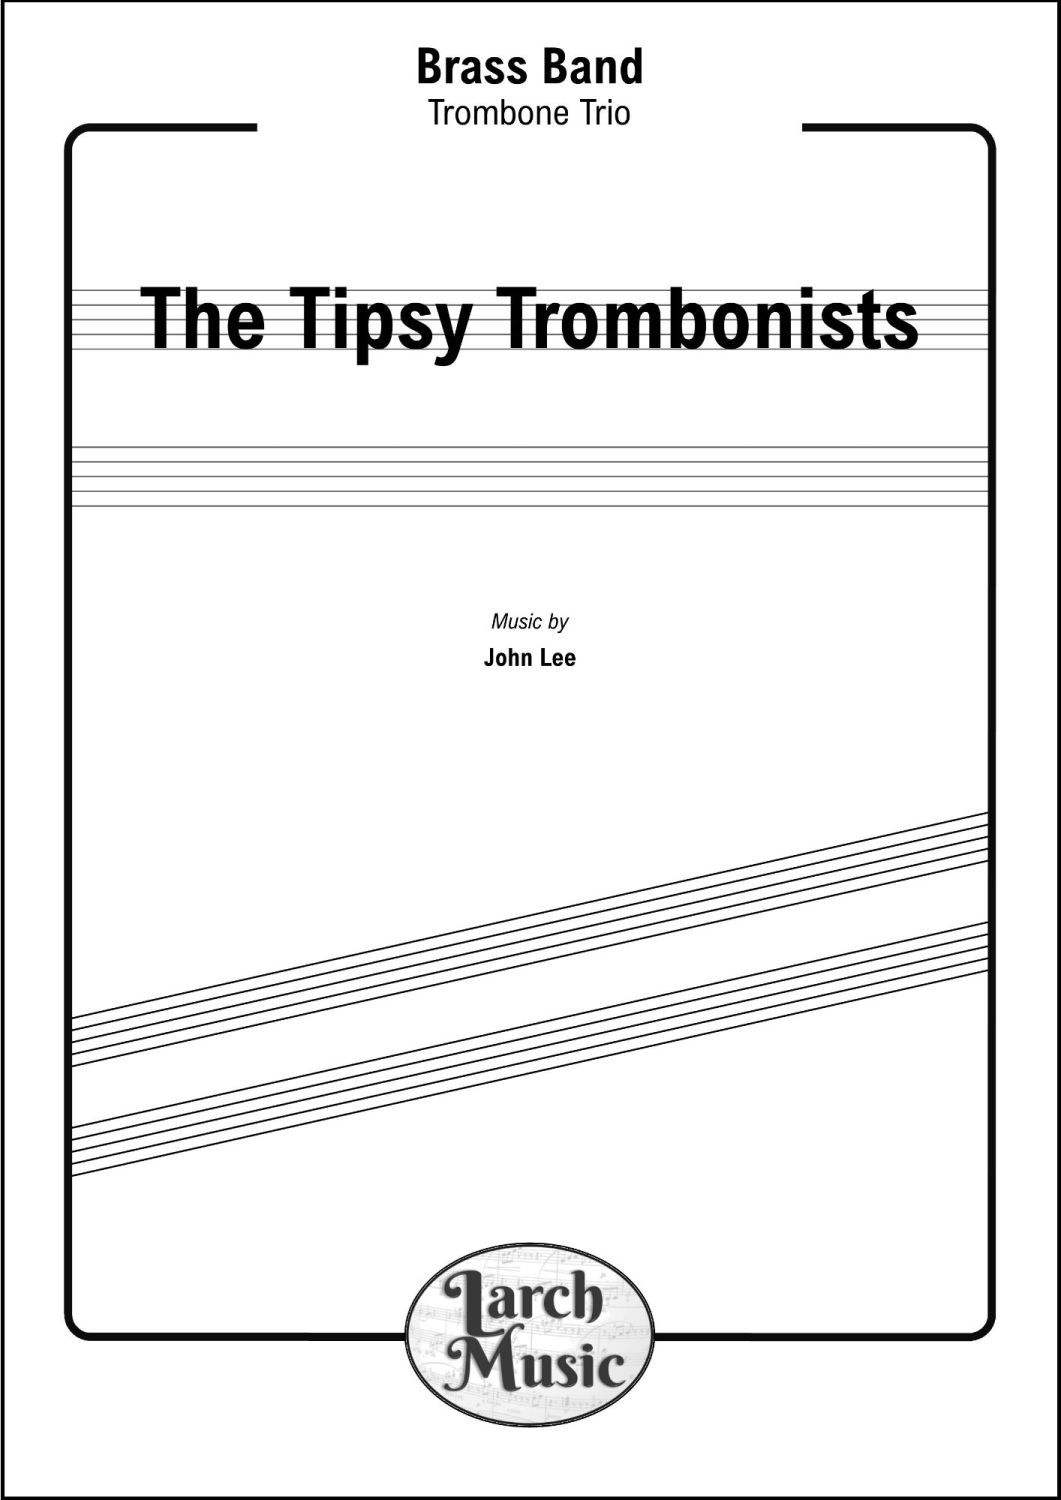 The Tipsy Trombonists - Trombone Trio & Brass Band